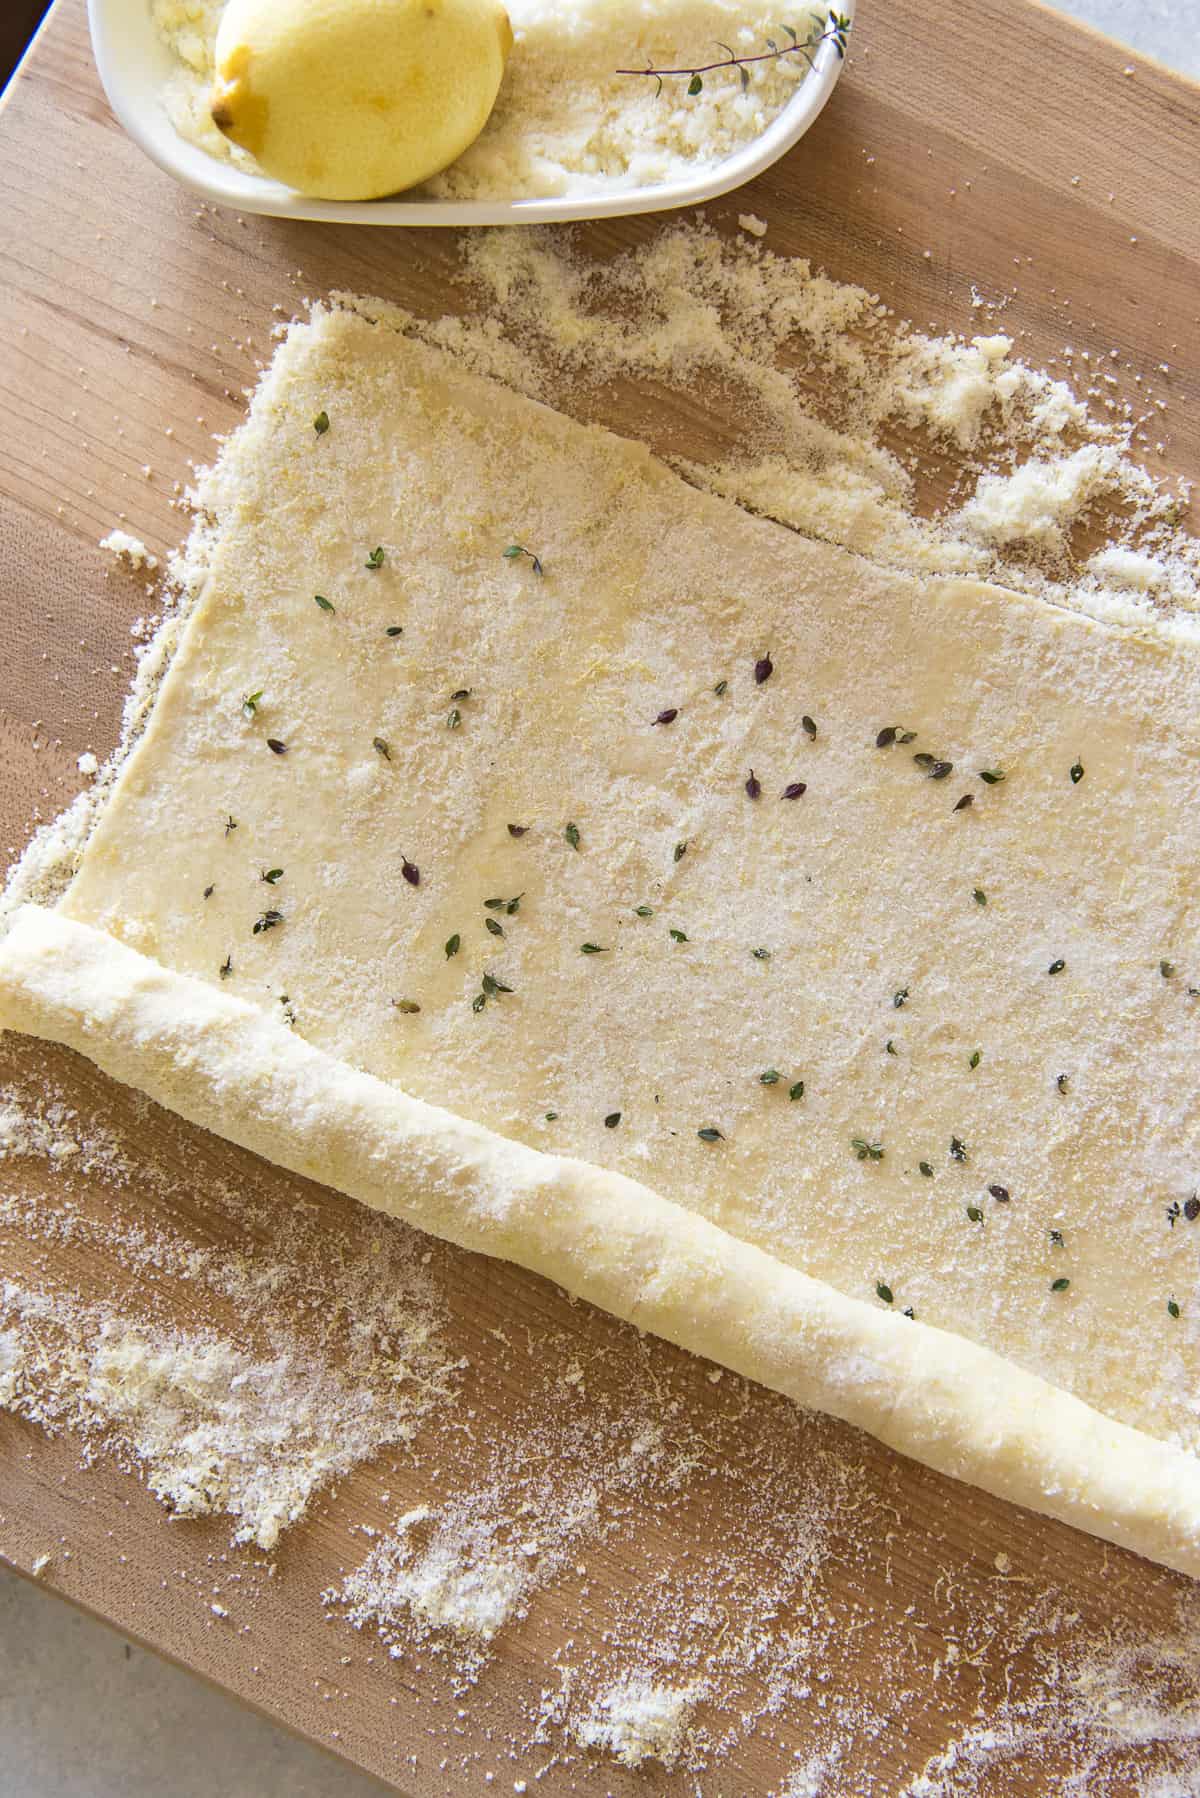 Uncooked puff pastry dough sprinkled with lemon sugar and thyme, rolled out on a wooden surface, with a bowl of filling nearby.